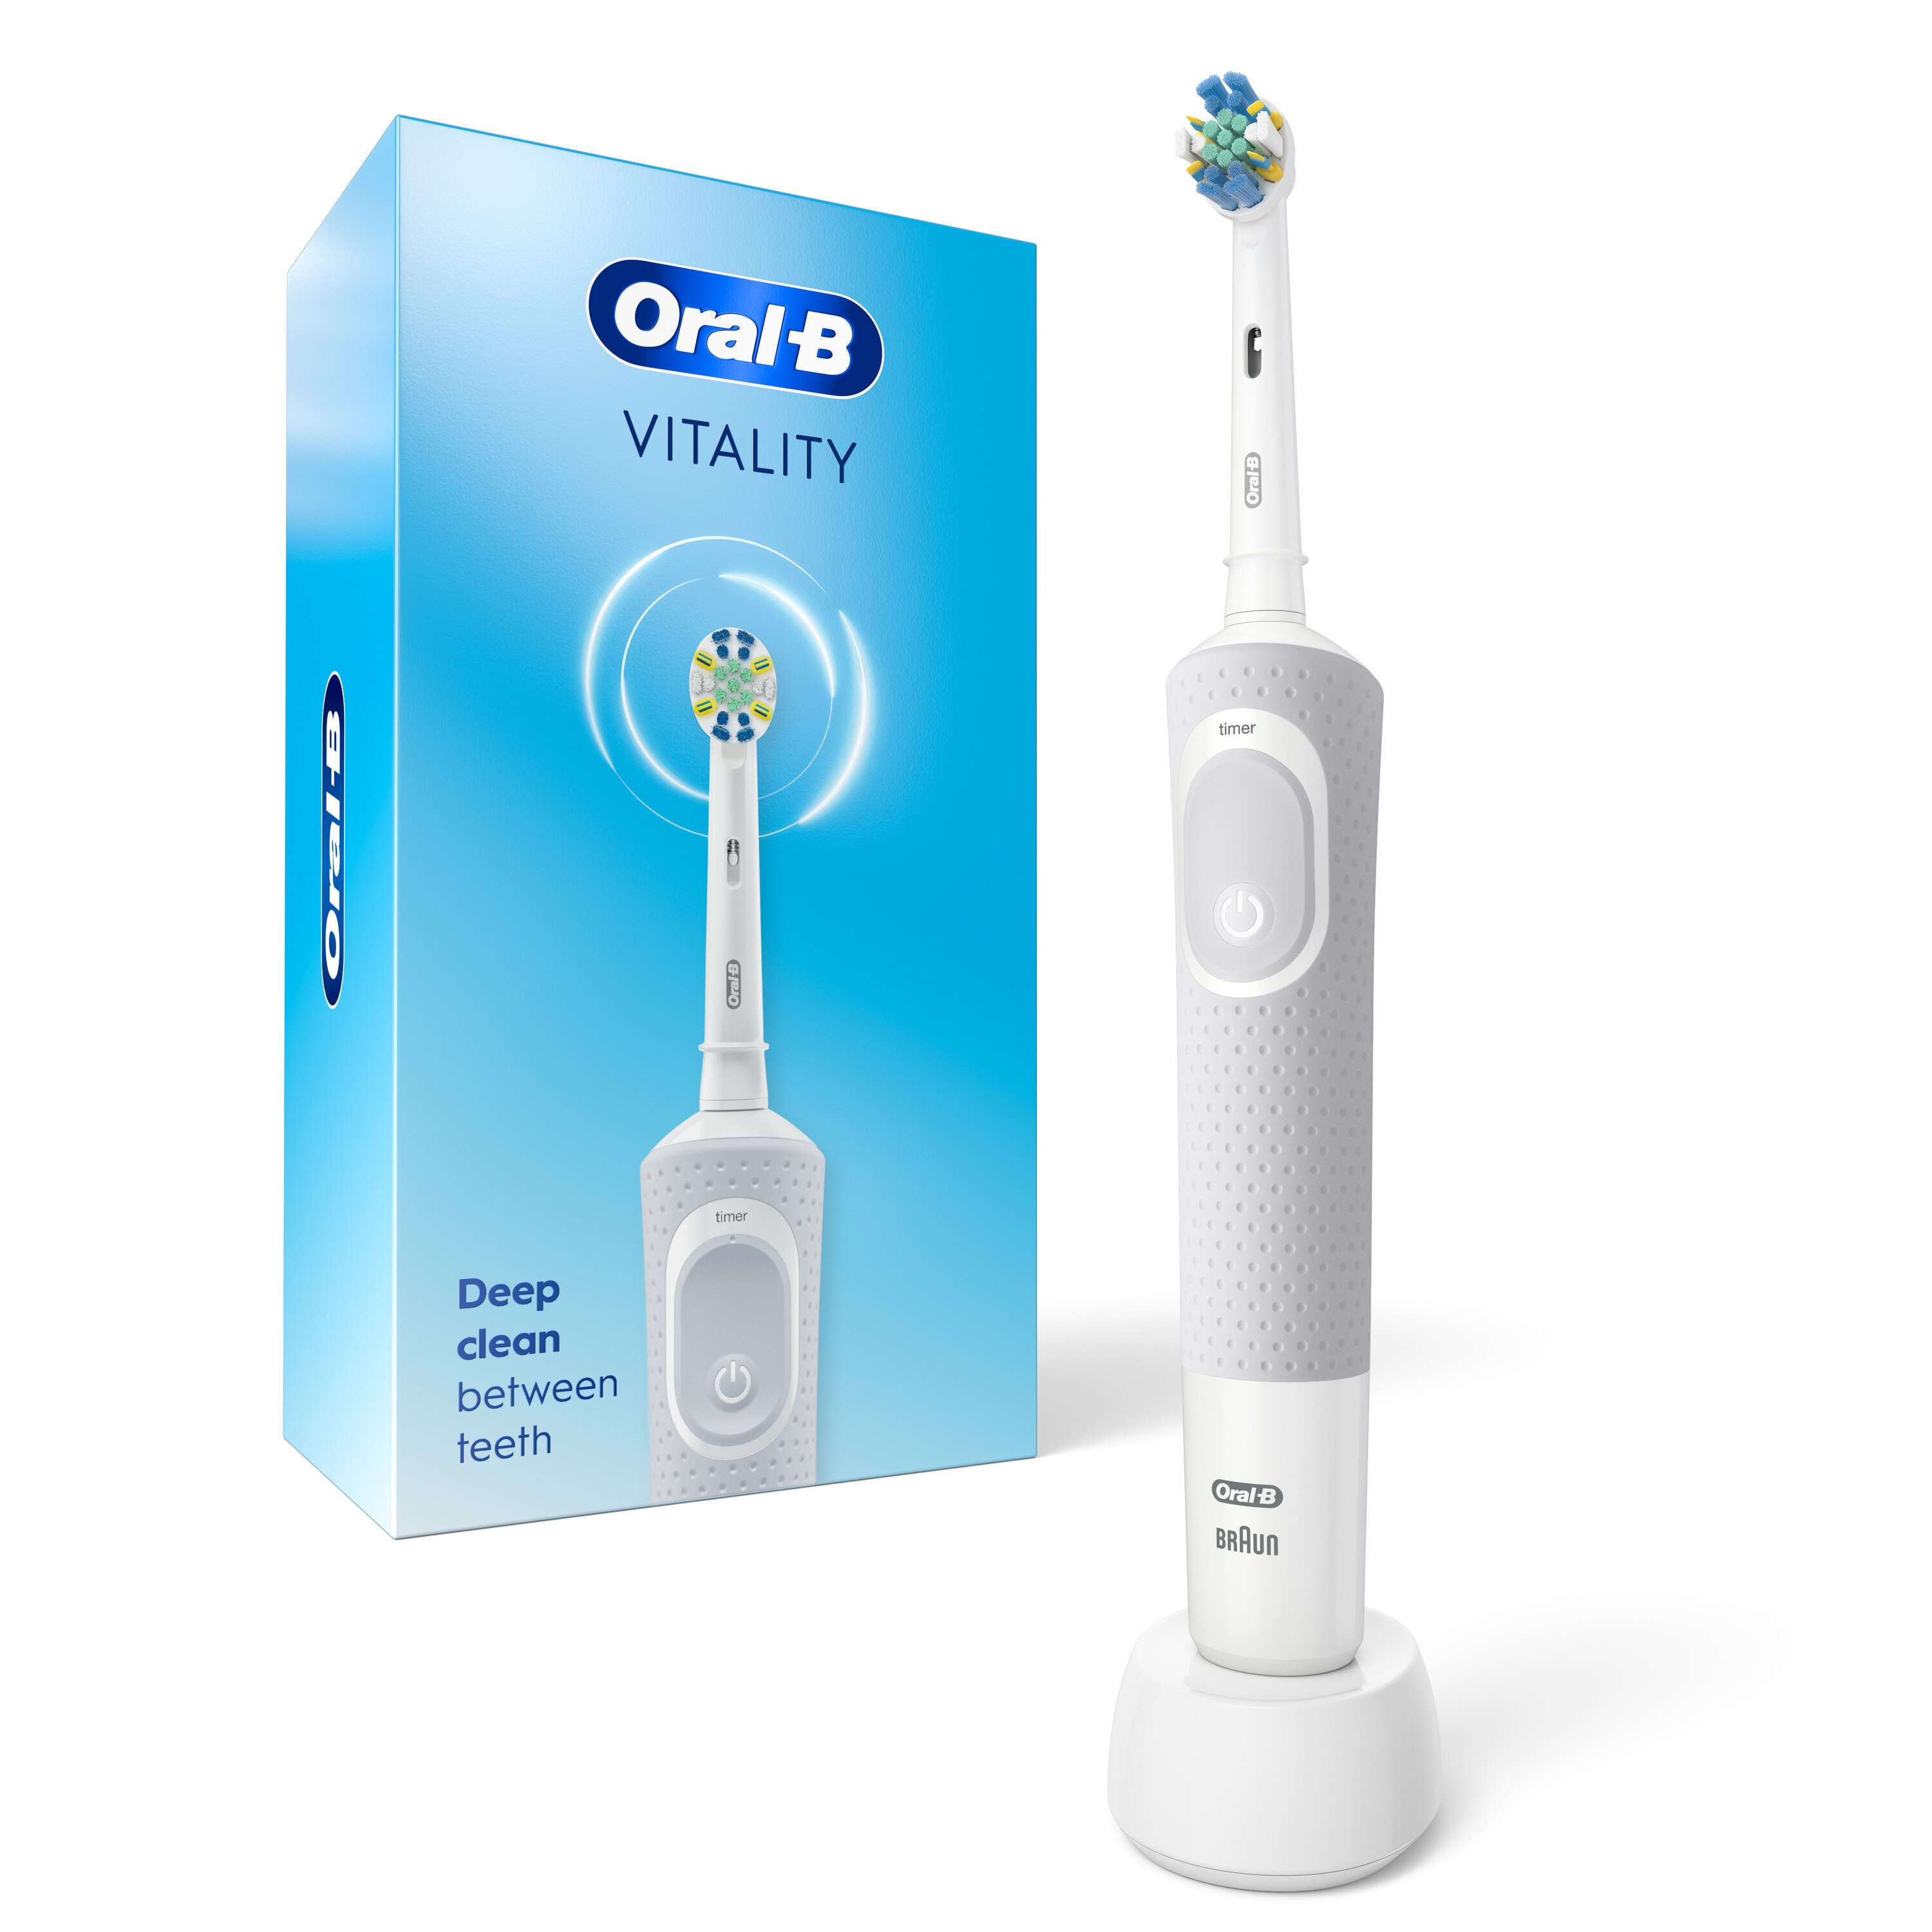 Oral-B Vitality Rechargeable Electric Toothbrush With FlossAction Brush Head , CVS